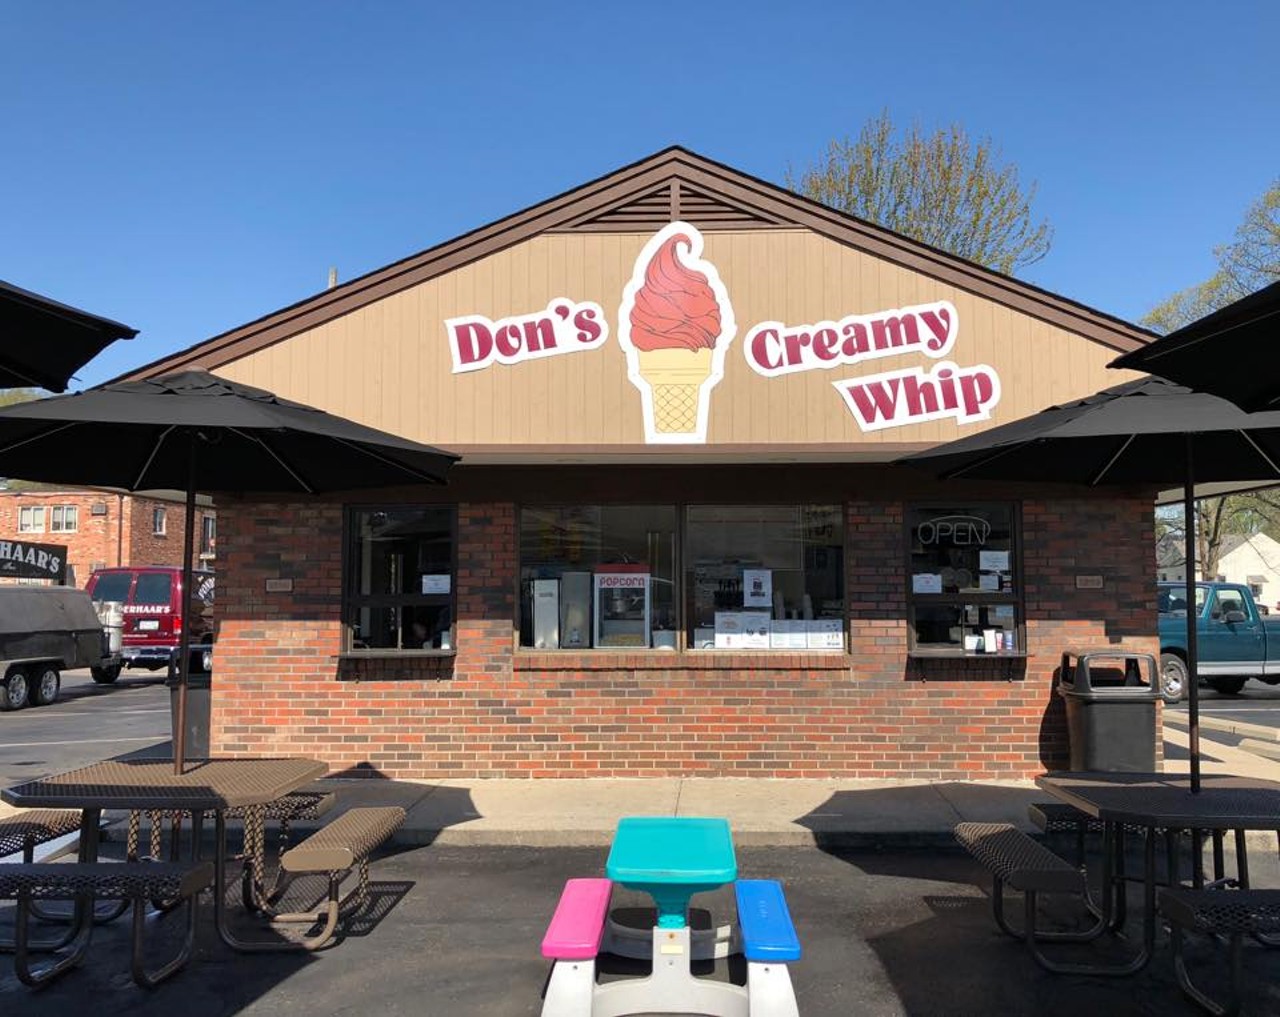 Don's Creamy Whip
1522 Market St., Reading
Don Vonderhaar of Vonderhaar Catering opened his creamy whip, “Don’s Creamy Whip,” in March 1976. Considered a hidden gem in Reading, it often has a long line of locals or passersby. Don’s offers not only ice cream but slushies and delicious fast food. No matter what you order from their extensive menu, the portions will be sure to please. Their most popular menu items are their soft-serve ice cream and “whippers,” similar to Flurries or Blizzards, with your choice of candy swirled perfectly within your favorite ice cream flavor.